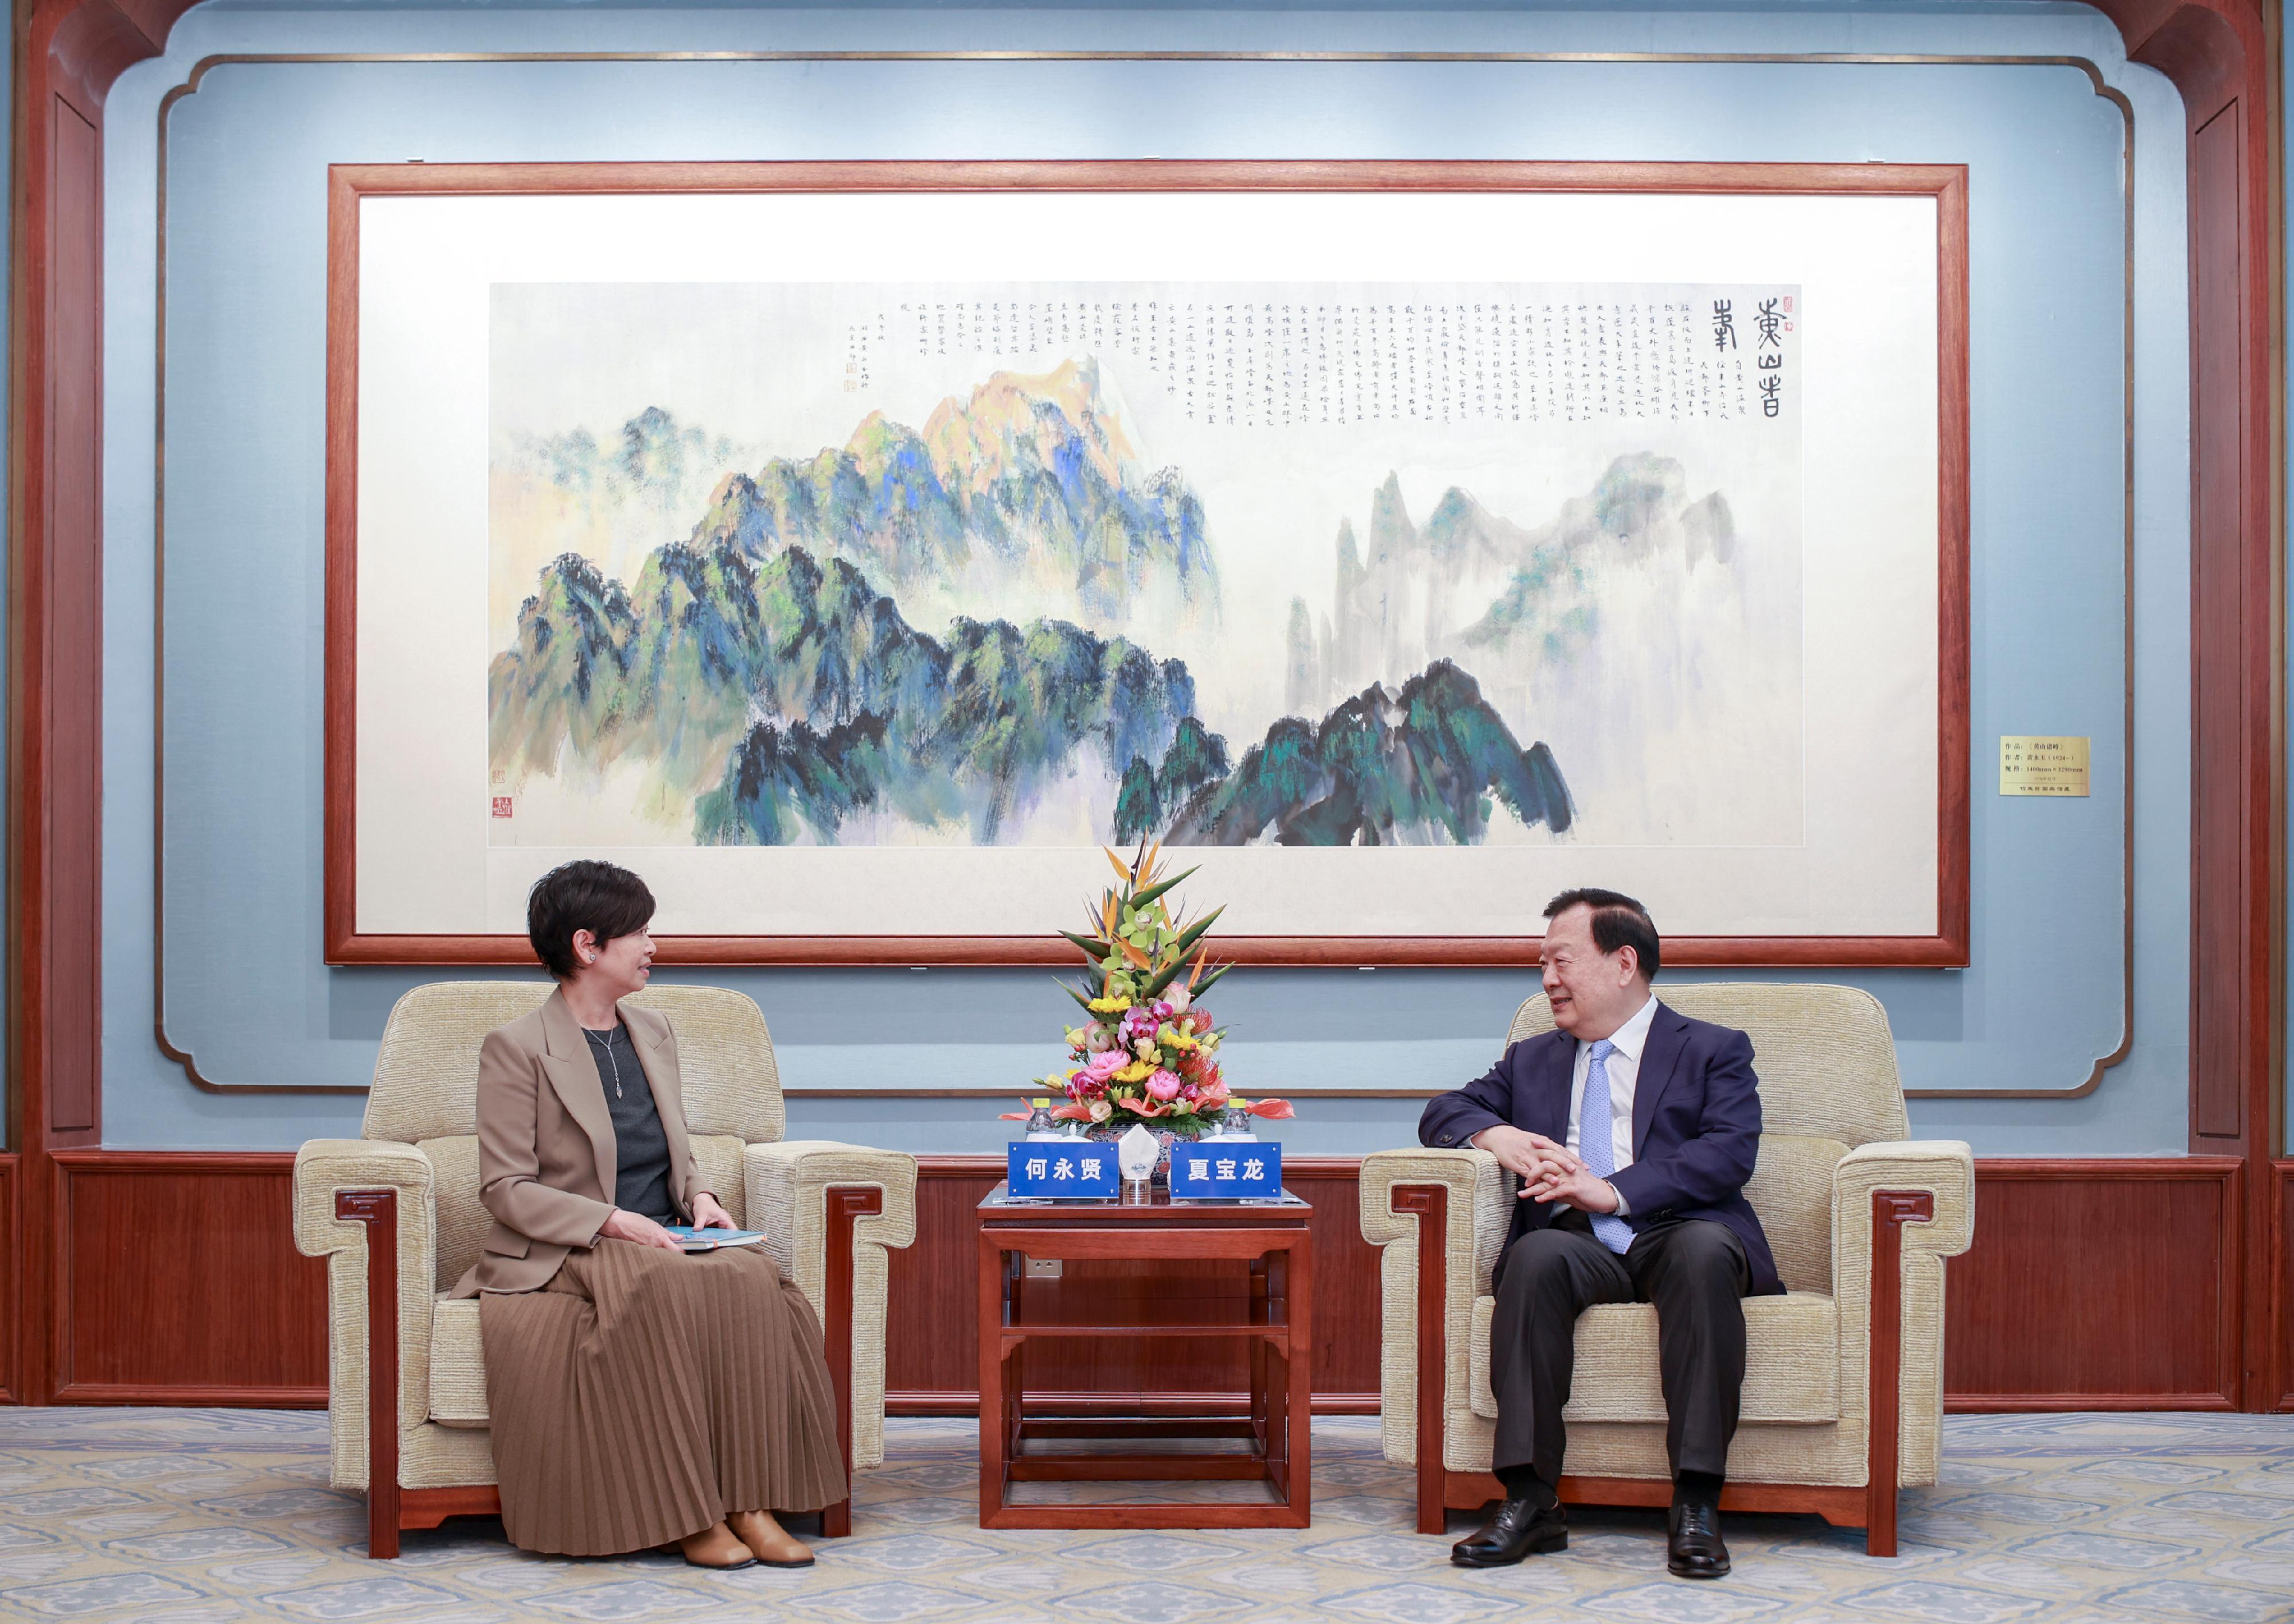 The Secretary for Housing, Ms Winnie Ho, was on the second day of her visit to Beijing today (May 31). Photo shows Ms Ho (left) calling on the Director of the Hong Kong and Macao Affairs Office of the State Council, Mr Xia Baolong (right), in the morning.